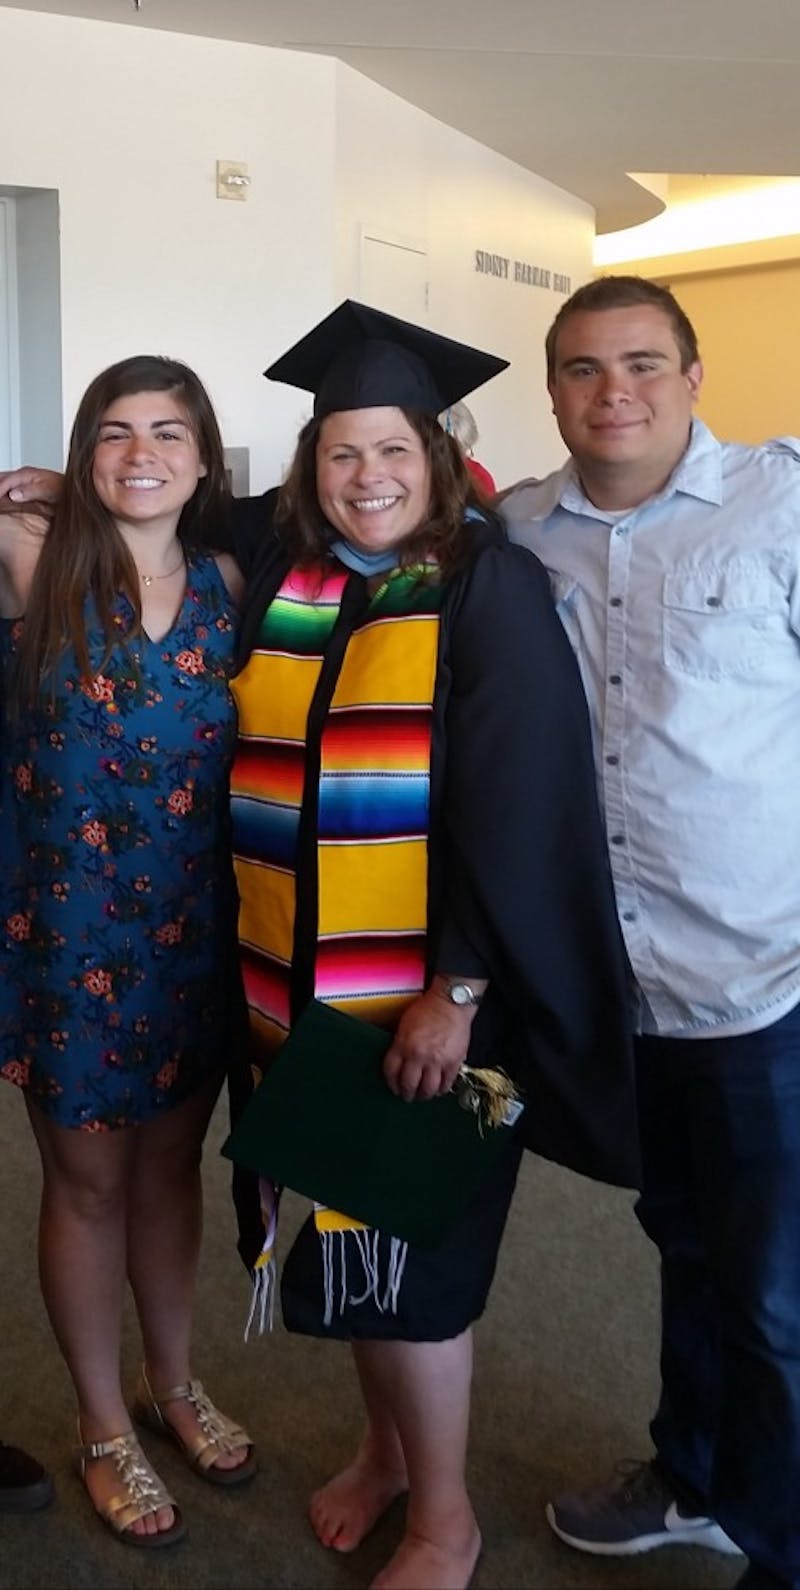 Amanda Hernandez Michalski is a sophomore math major at the University of Portland. She is pictured here with her mother and brother. Photo courtesy of Amanda Hernandez Michalski.